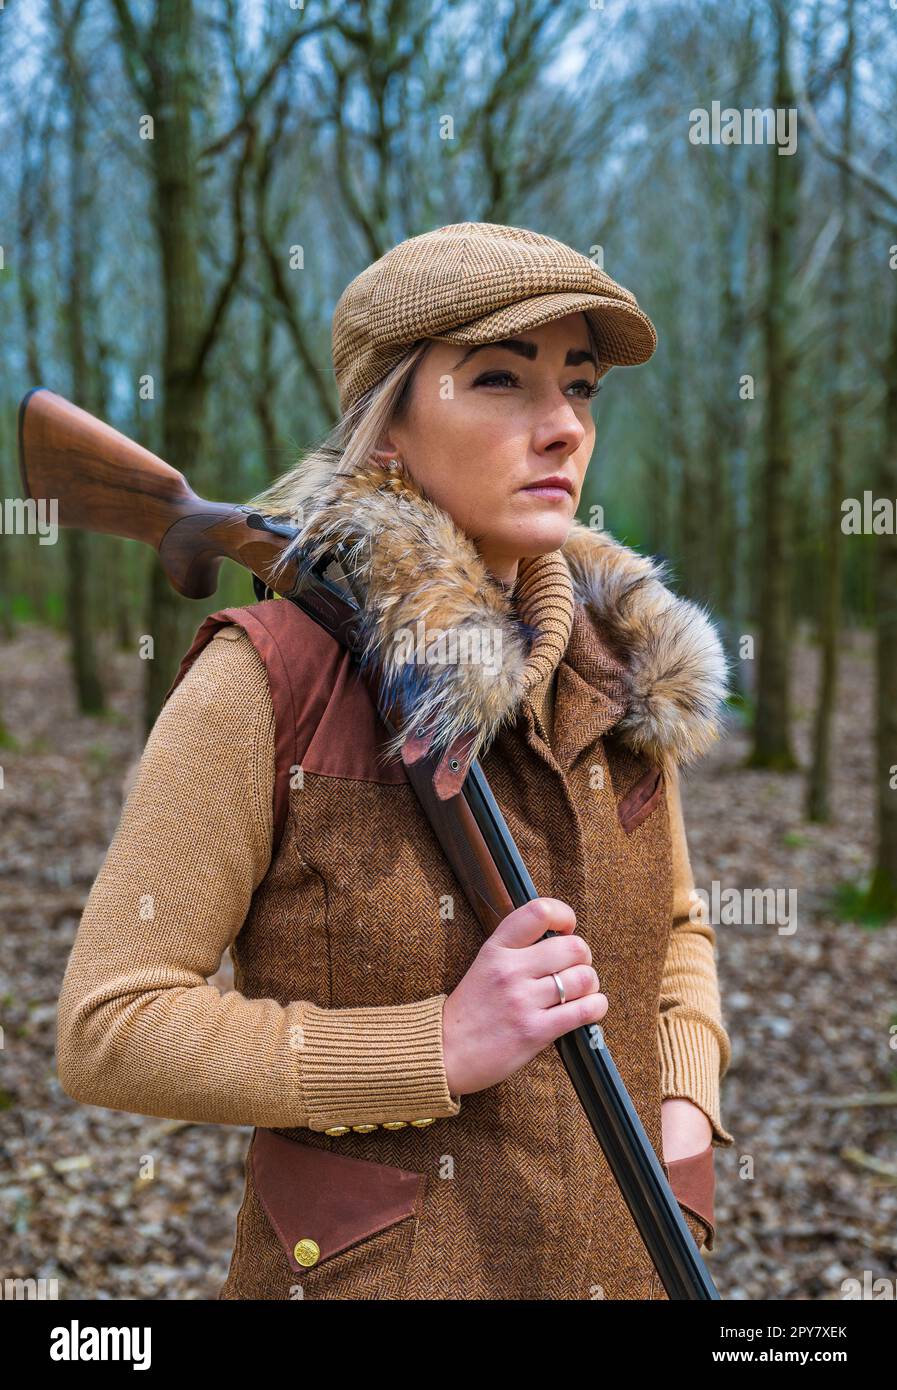 A thirty plus year old woman shooting in woodlands in the late spring with a shotgun preparing to shoot pigeons Stock Photo